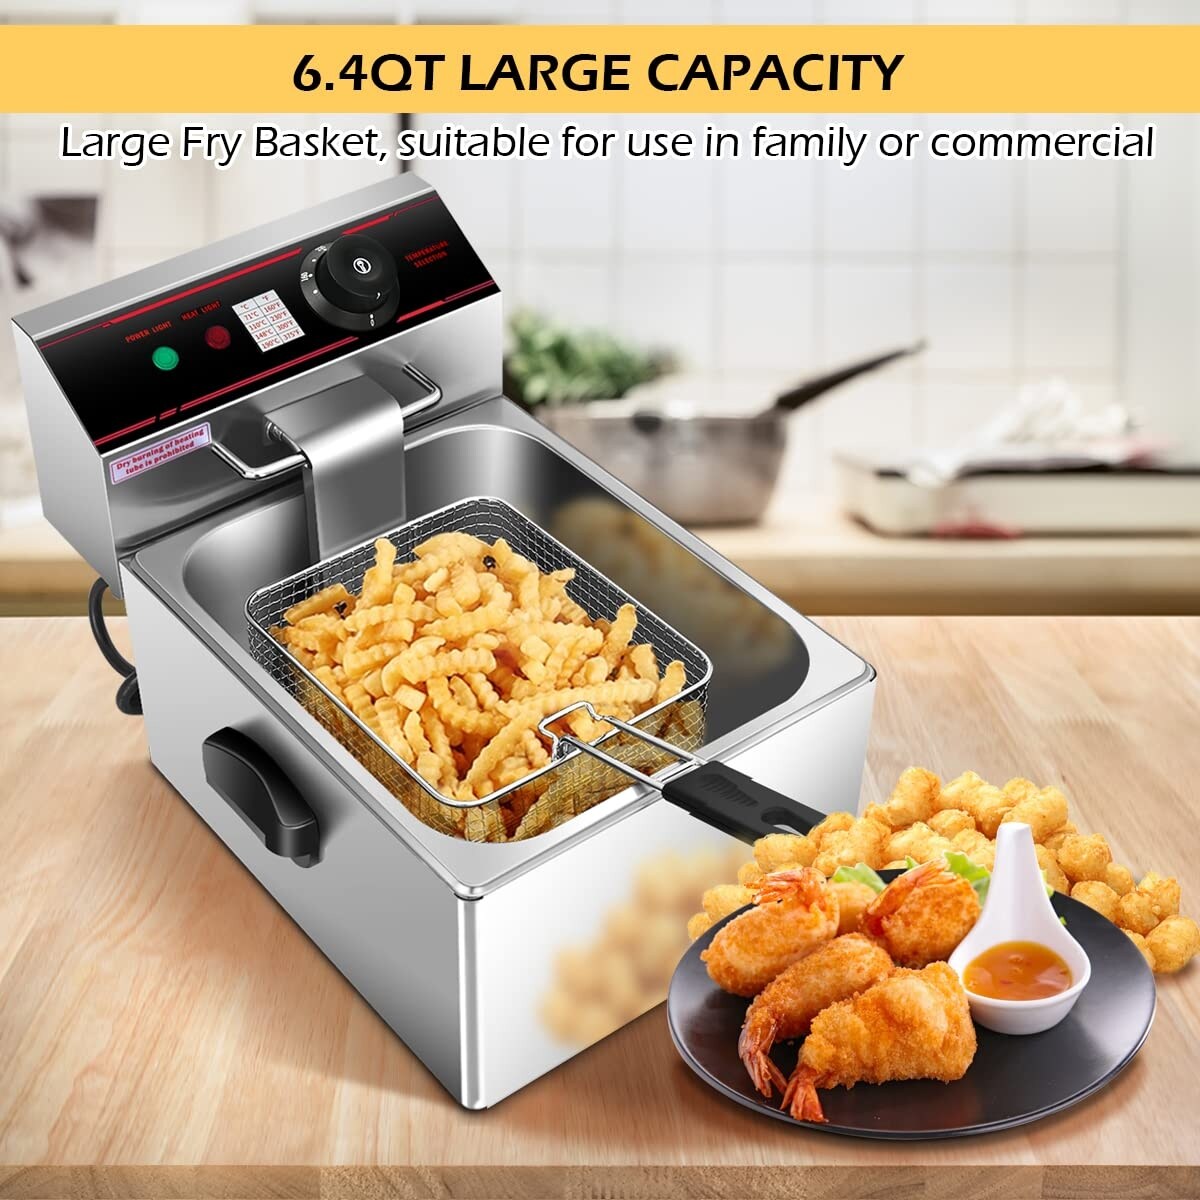 https://ak1.ostkcdn.com/images/products/is/images/direct/e3c6d279cbae1461f191fb8176321fb2caea1e82/Deep-Fryer%2C-6.4QT-Stainless-Steel-Electric-Deep-Fryer-with-Basket%2C-Temperature-Control-for-French-Fries-Turkey-Chicken.jpg